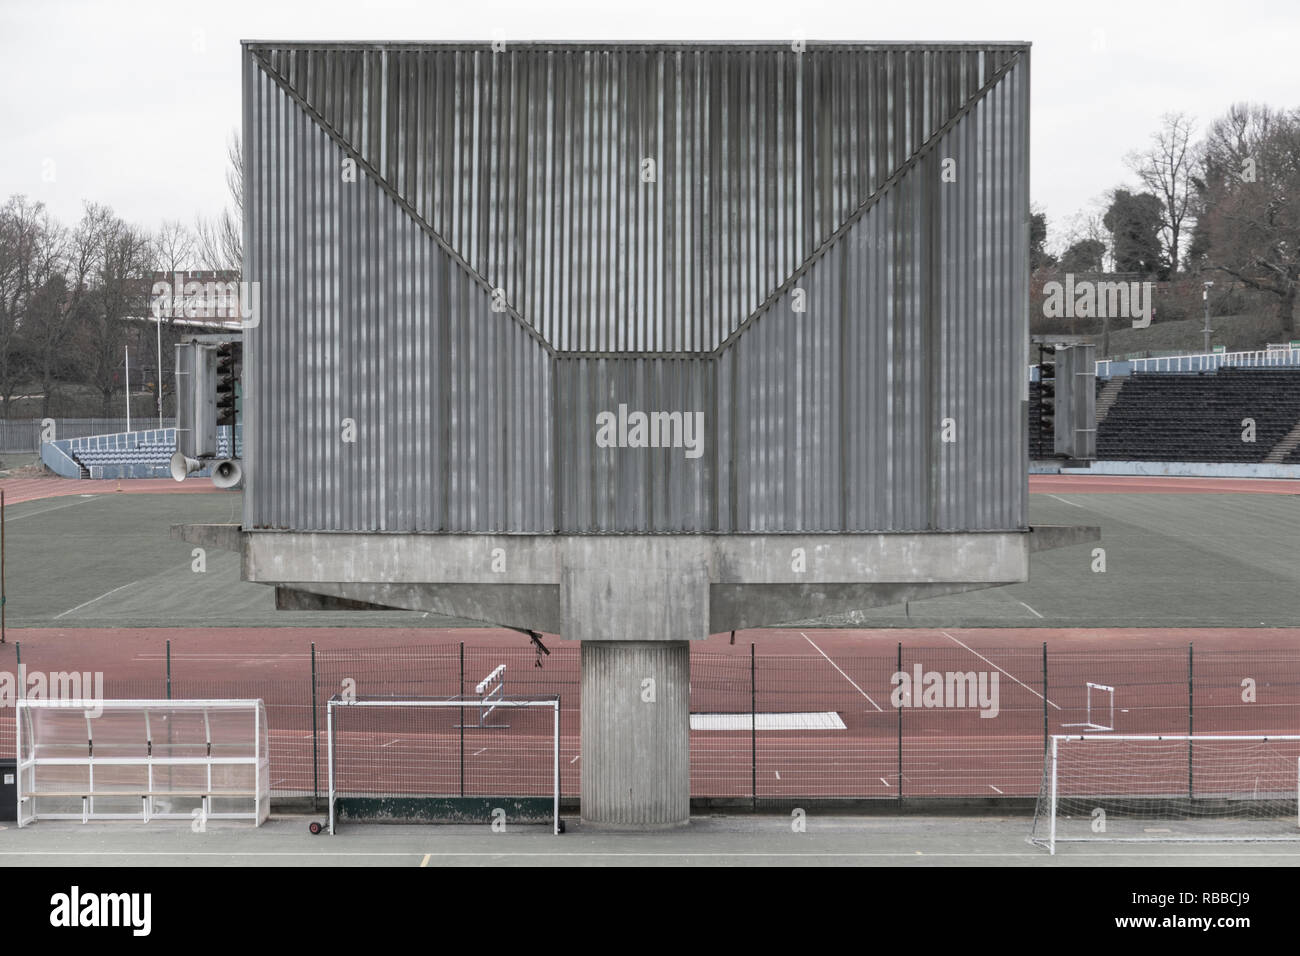 Crystal Palace National Sports Center, Bromley Greater London, Atletica Arena Foto Stock